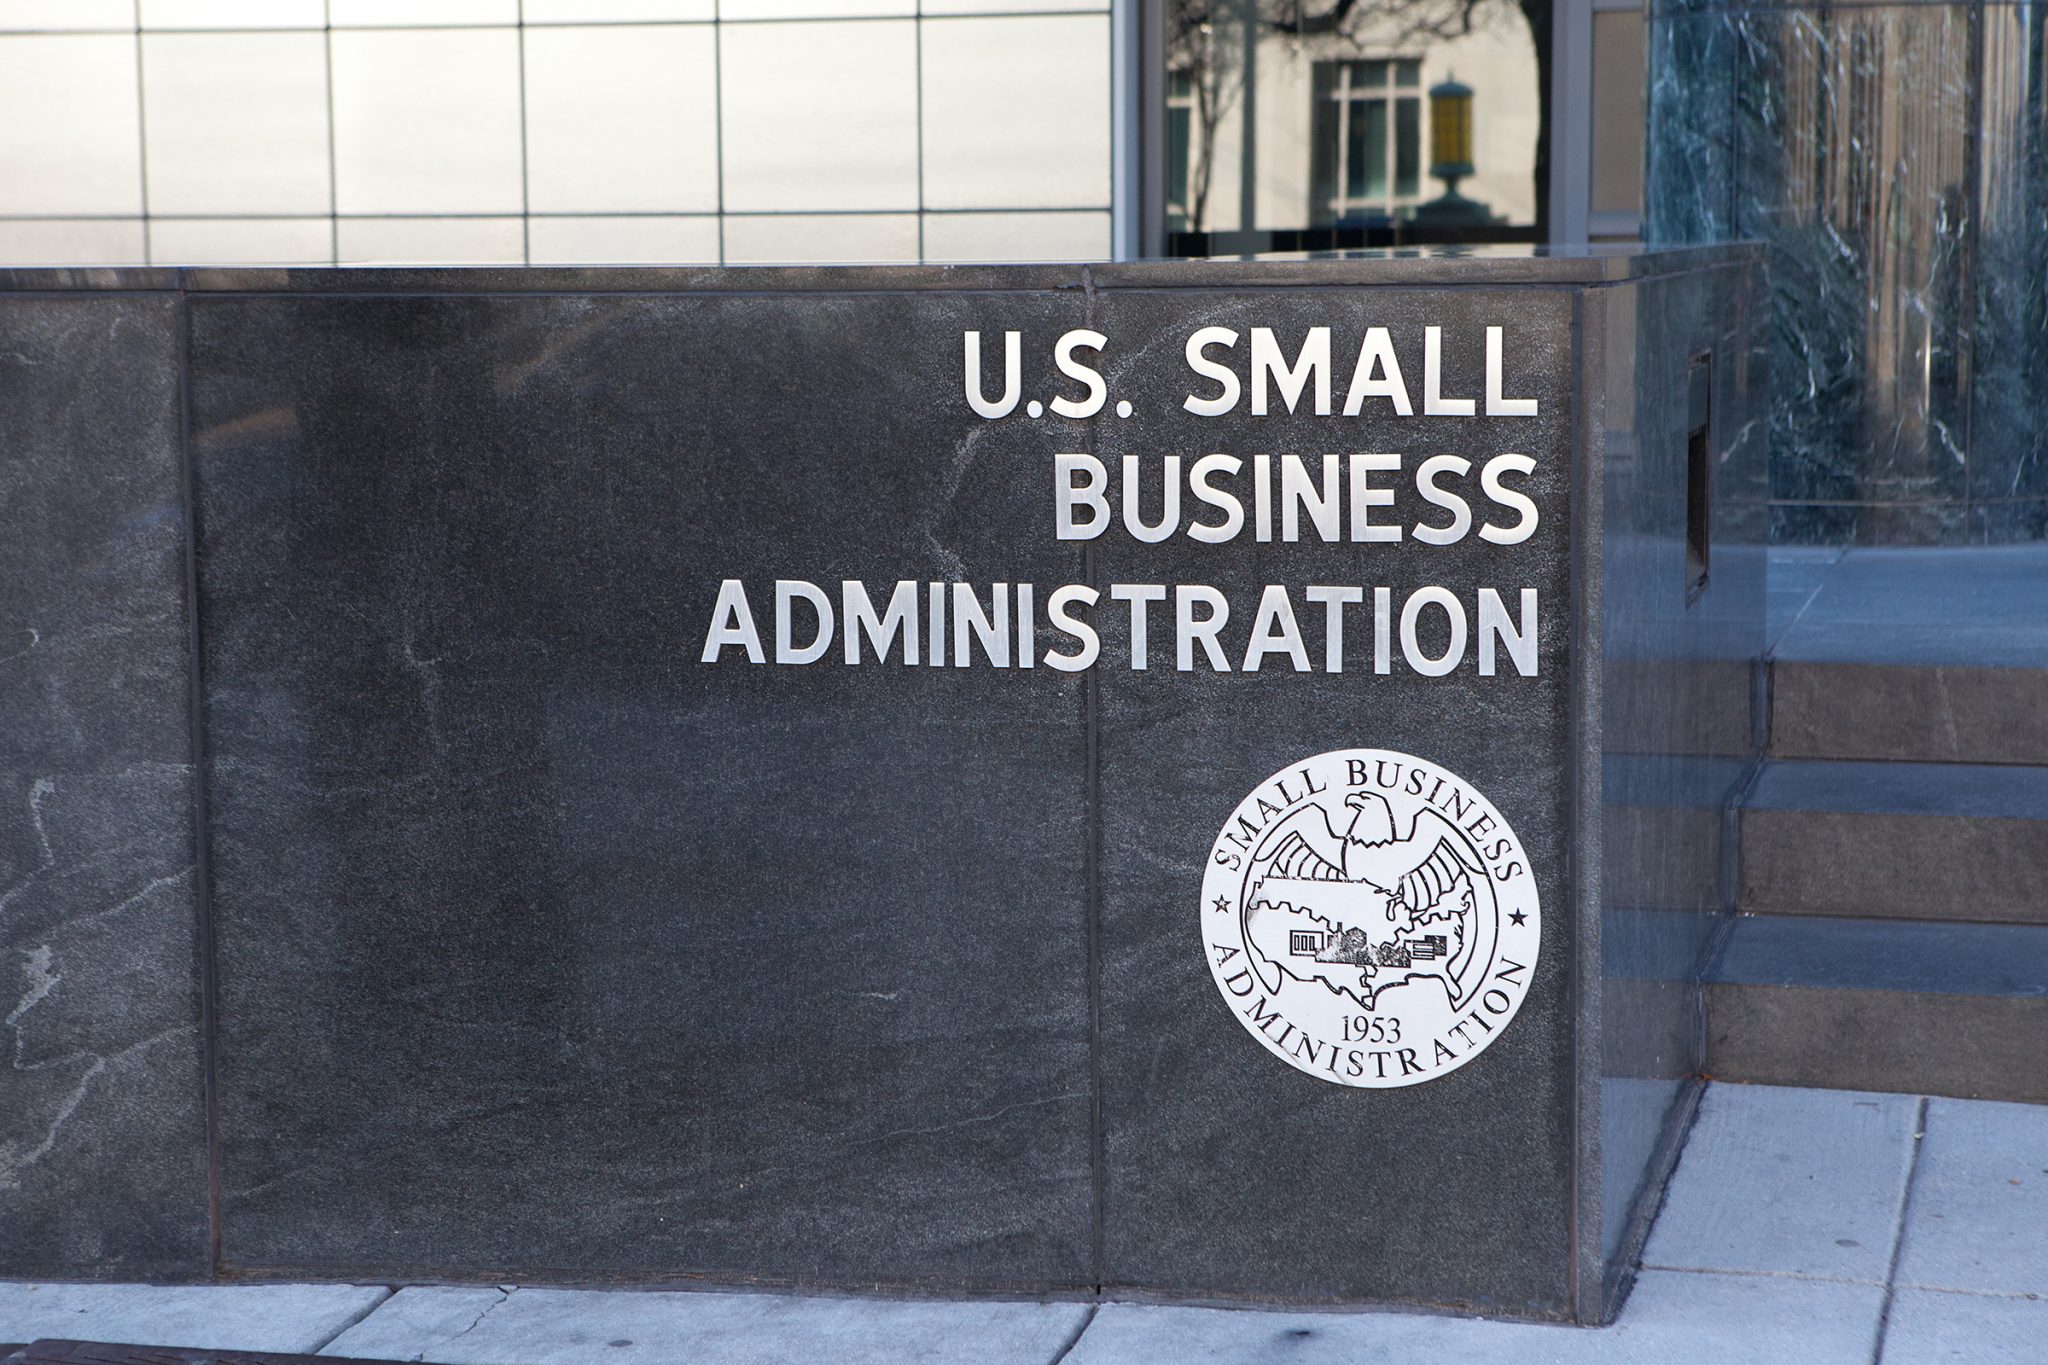 Photo showing U.S. Small Business Administration government building